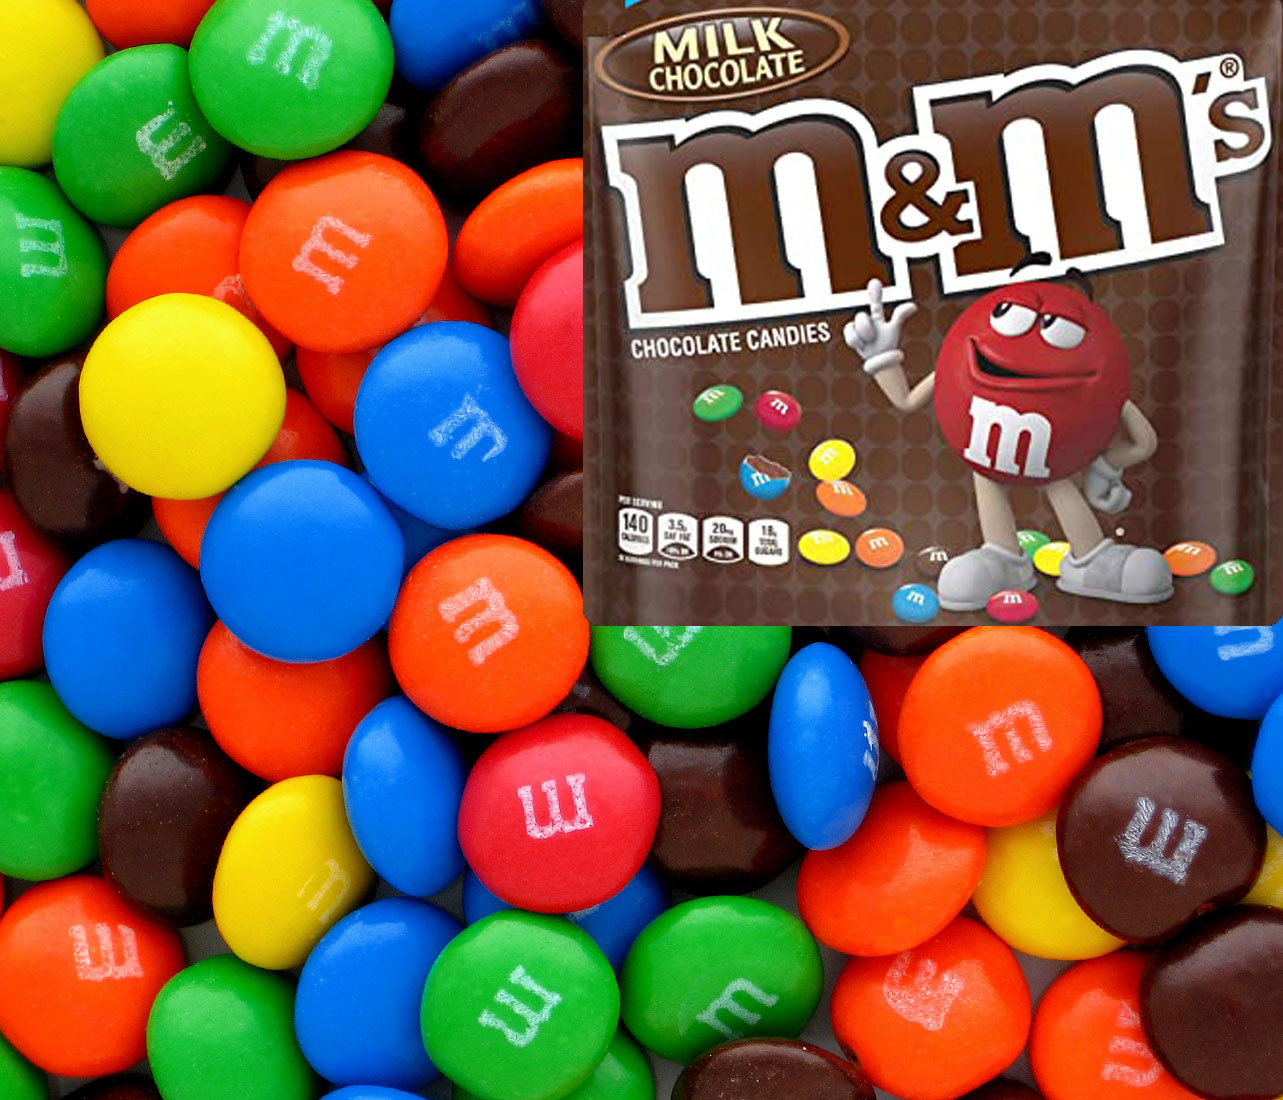 Chocolate M&M's Chocolate Party Bag, 1kg